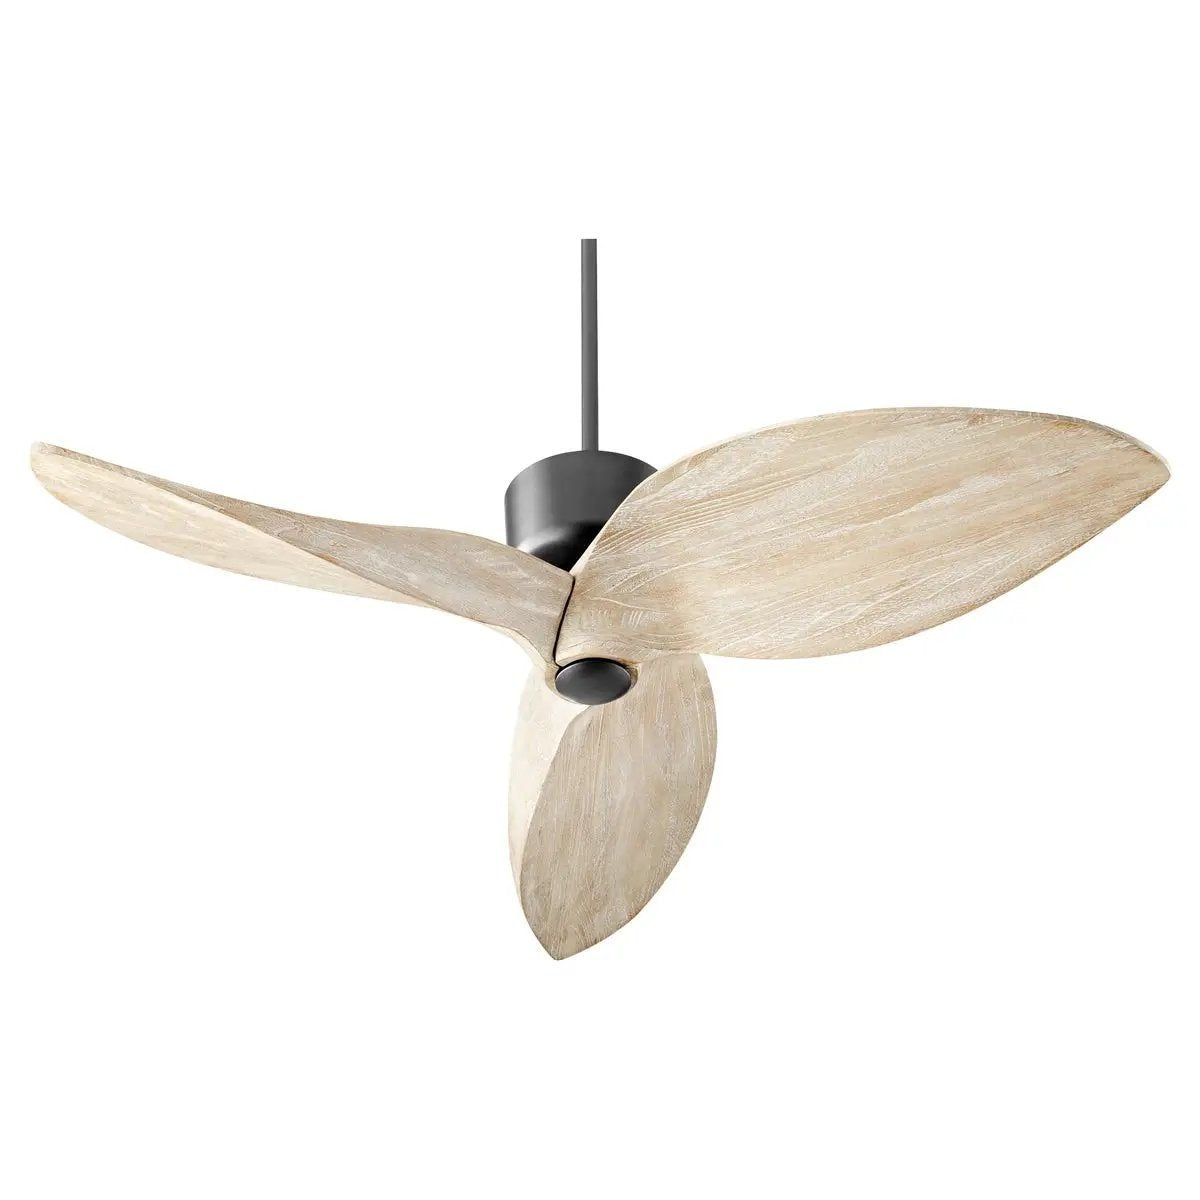 Contemporary Ceiling Fan with Distressed Finish and Weathered Oak Blades, 52&quot; Blade Sweep, 45 Degree Pitch. Perfect for Boho-Chic, Eclectic, or Modern Farmhouse Spaces. Quorum International DC-125NS-30, UL Listed, Dry Location. 18.5&quot;H x 52&quot;W. Limited Lifetime Warranty.